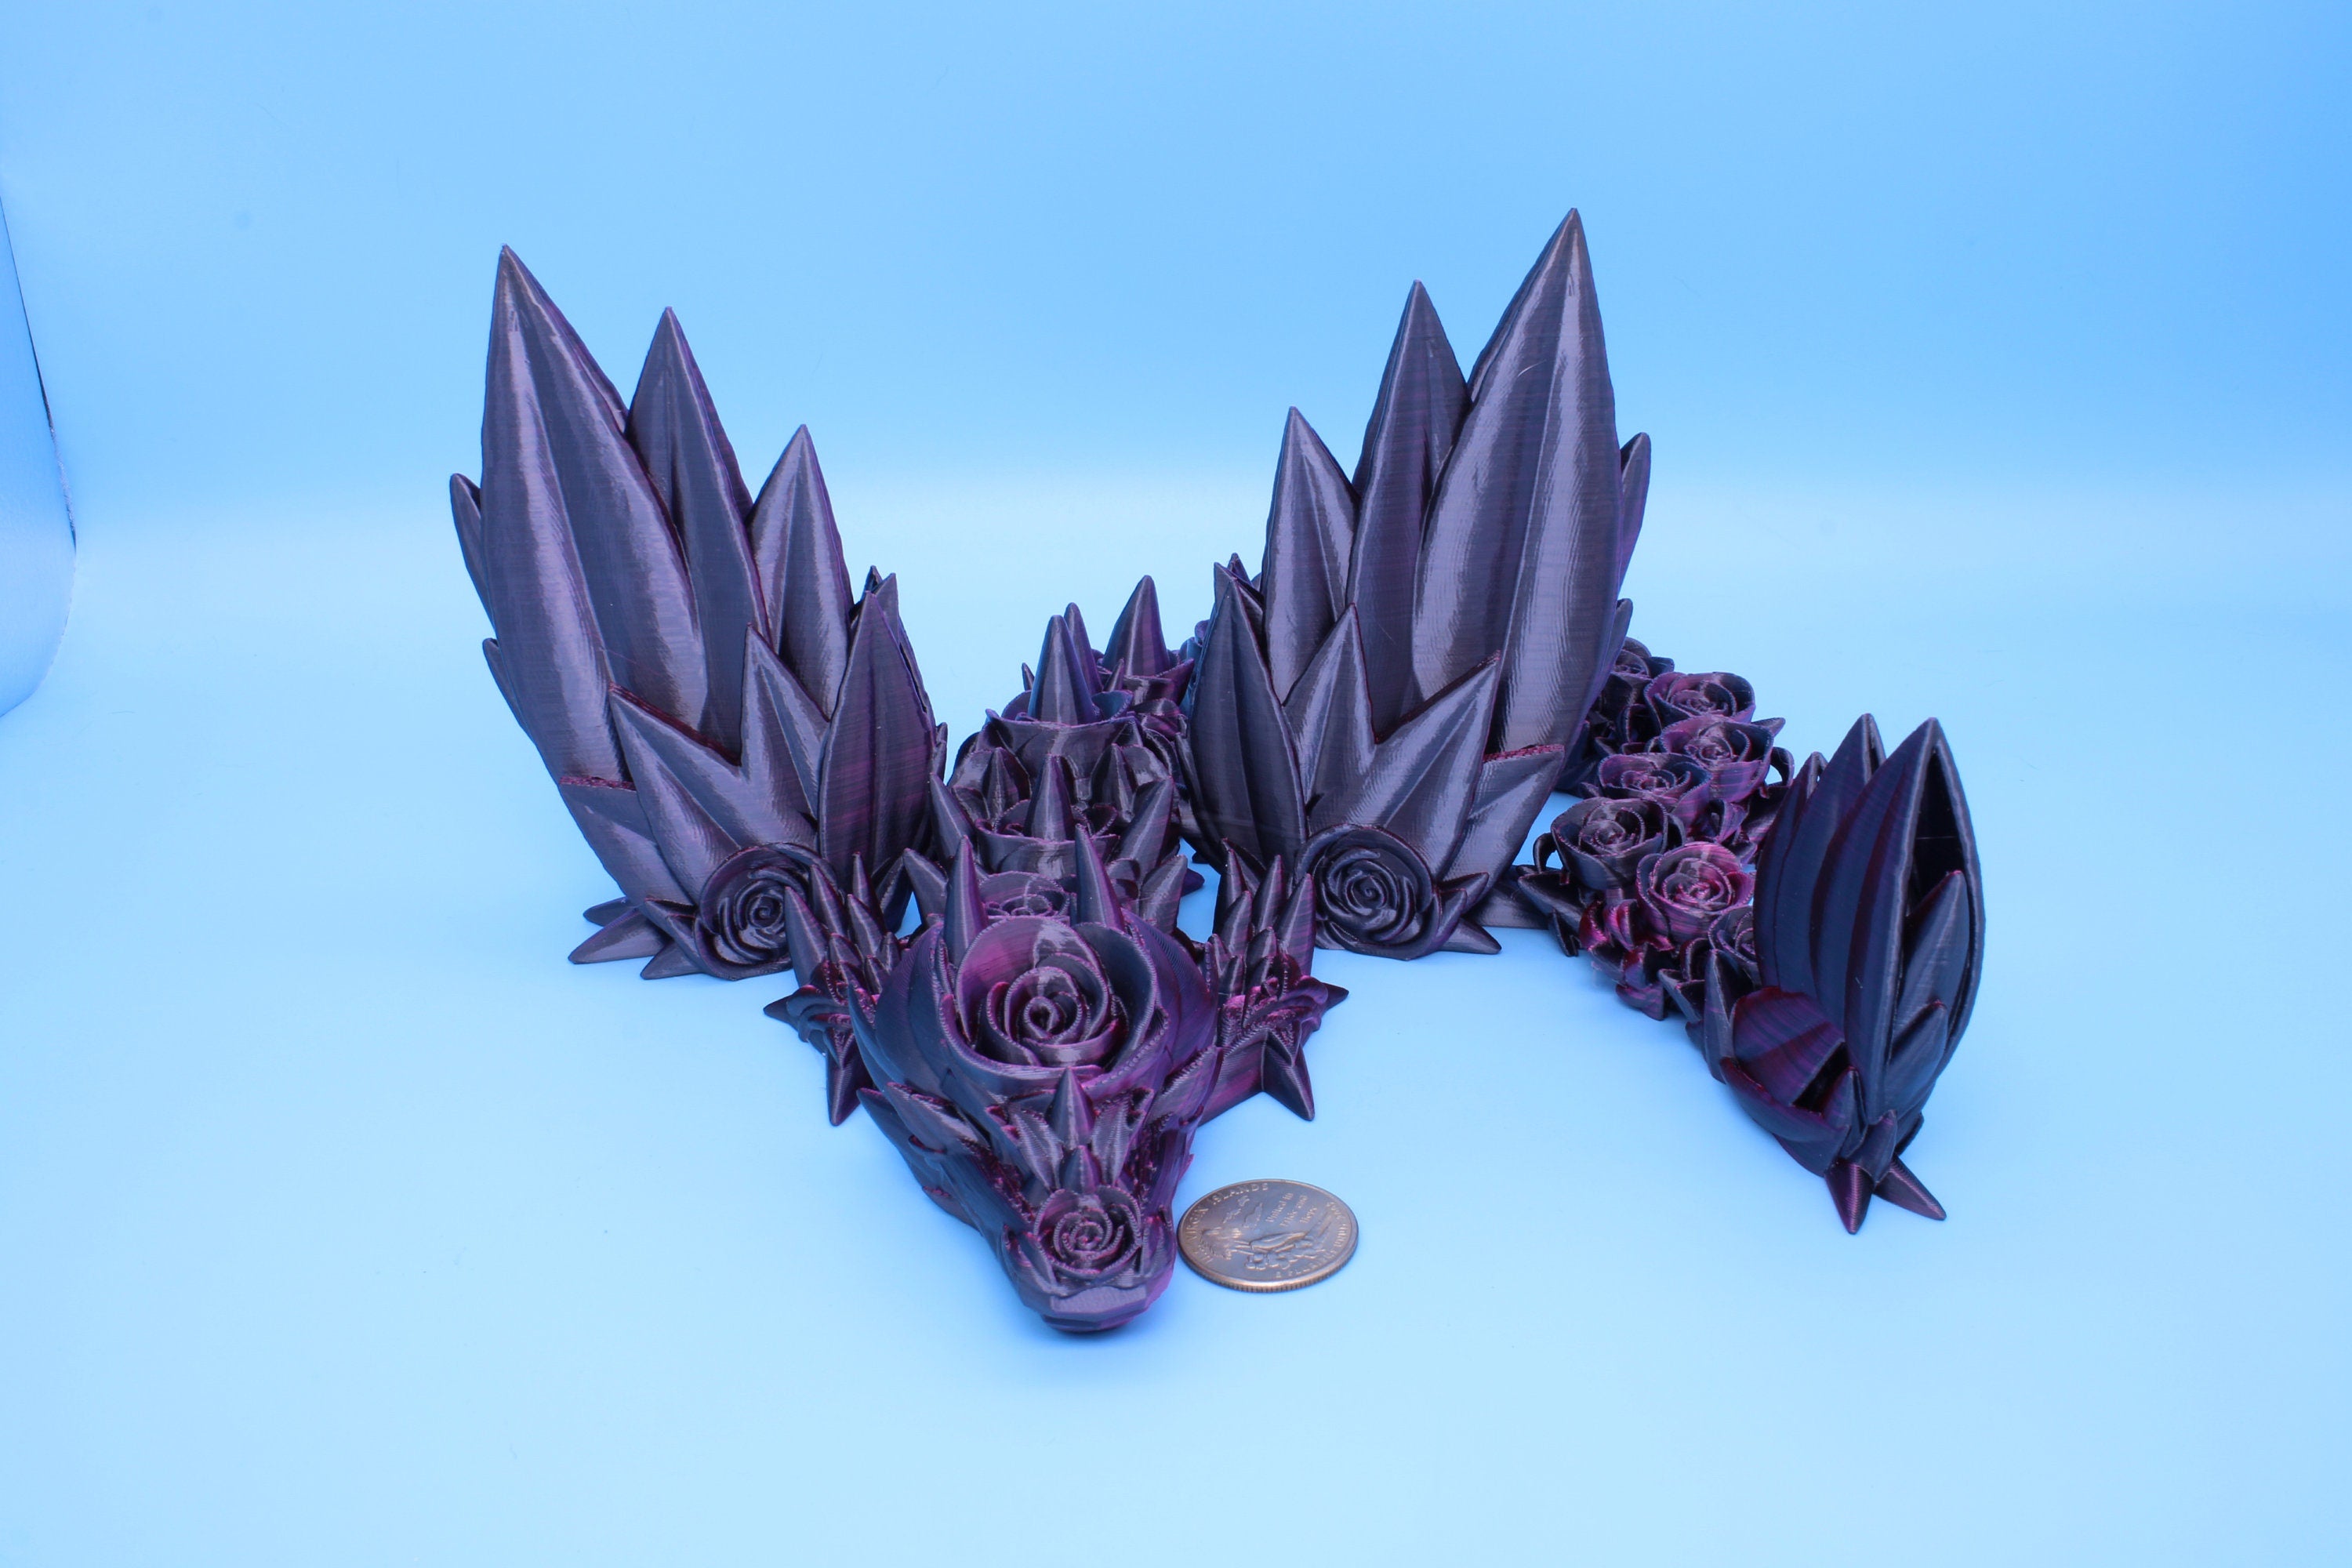 Rose Wing Dragon | Articulating Dragon | 3D Printed Fidget | 19 in. | Made To Order